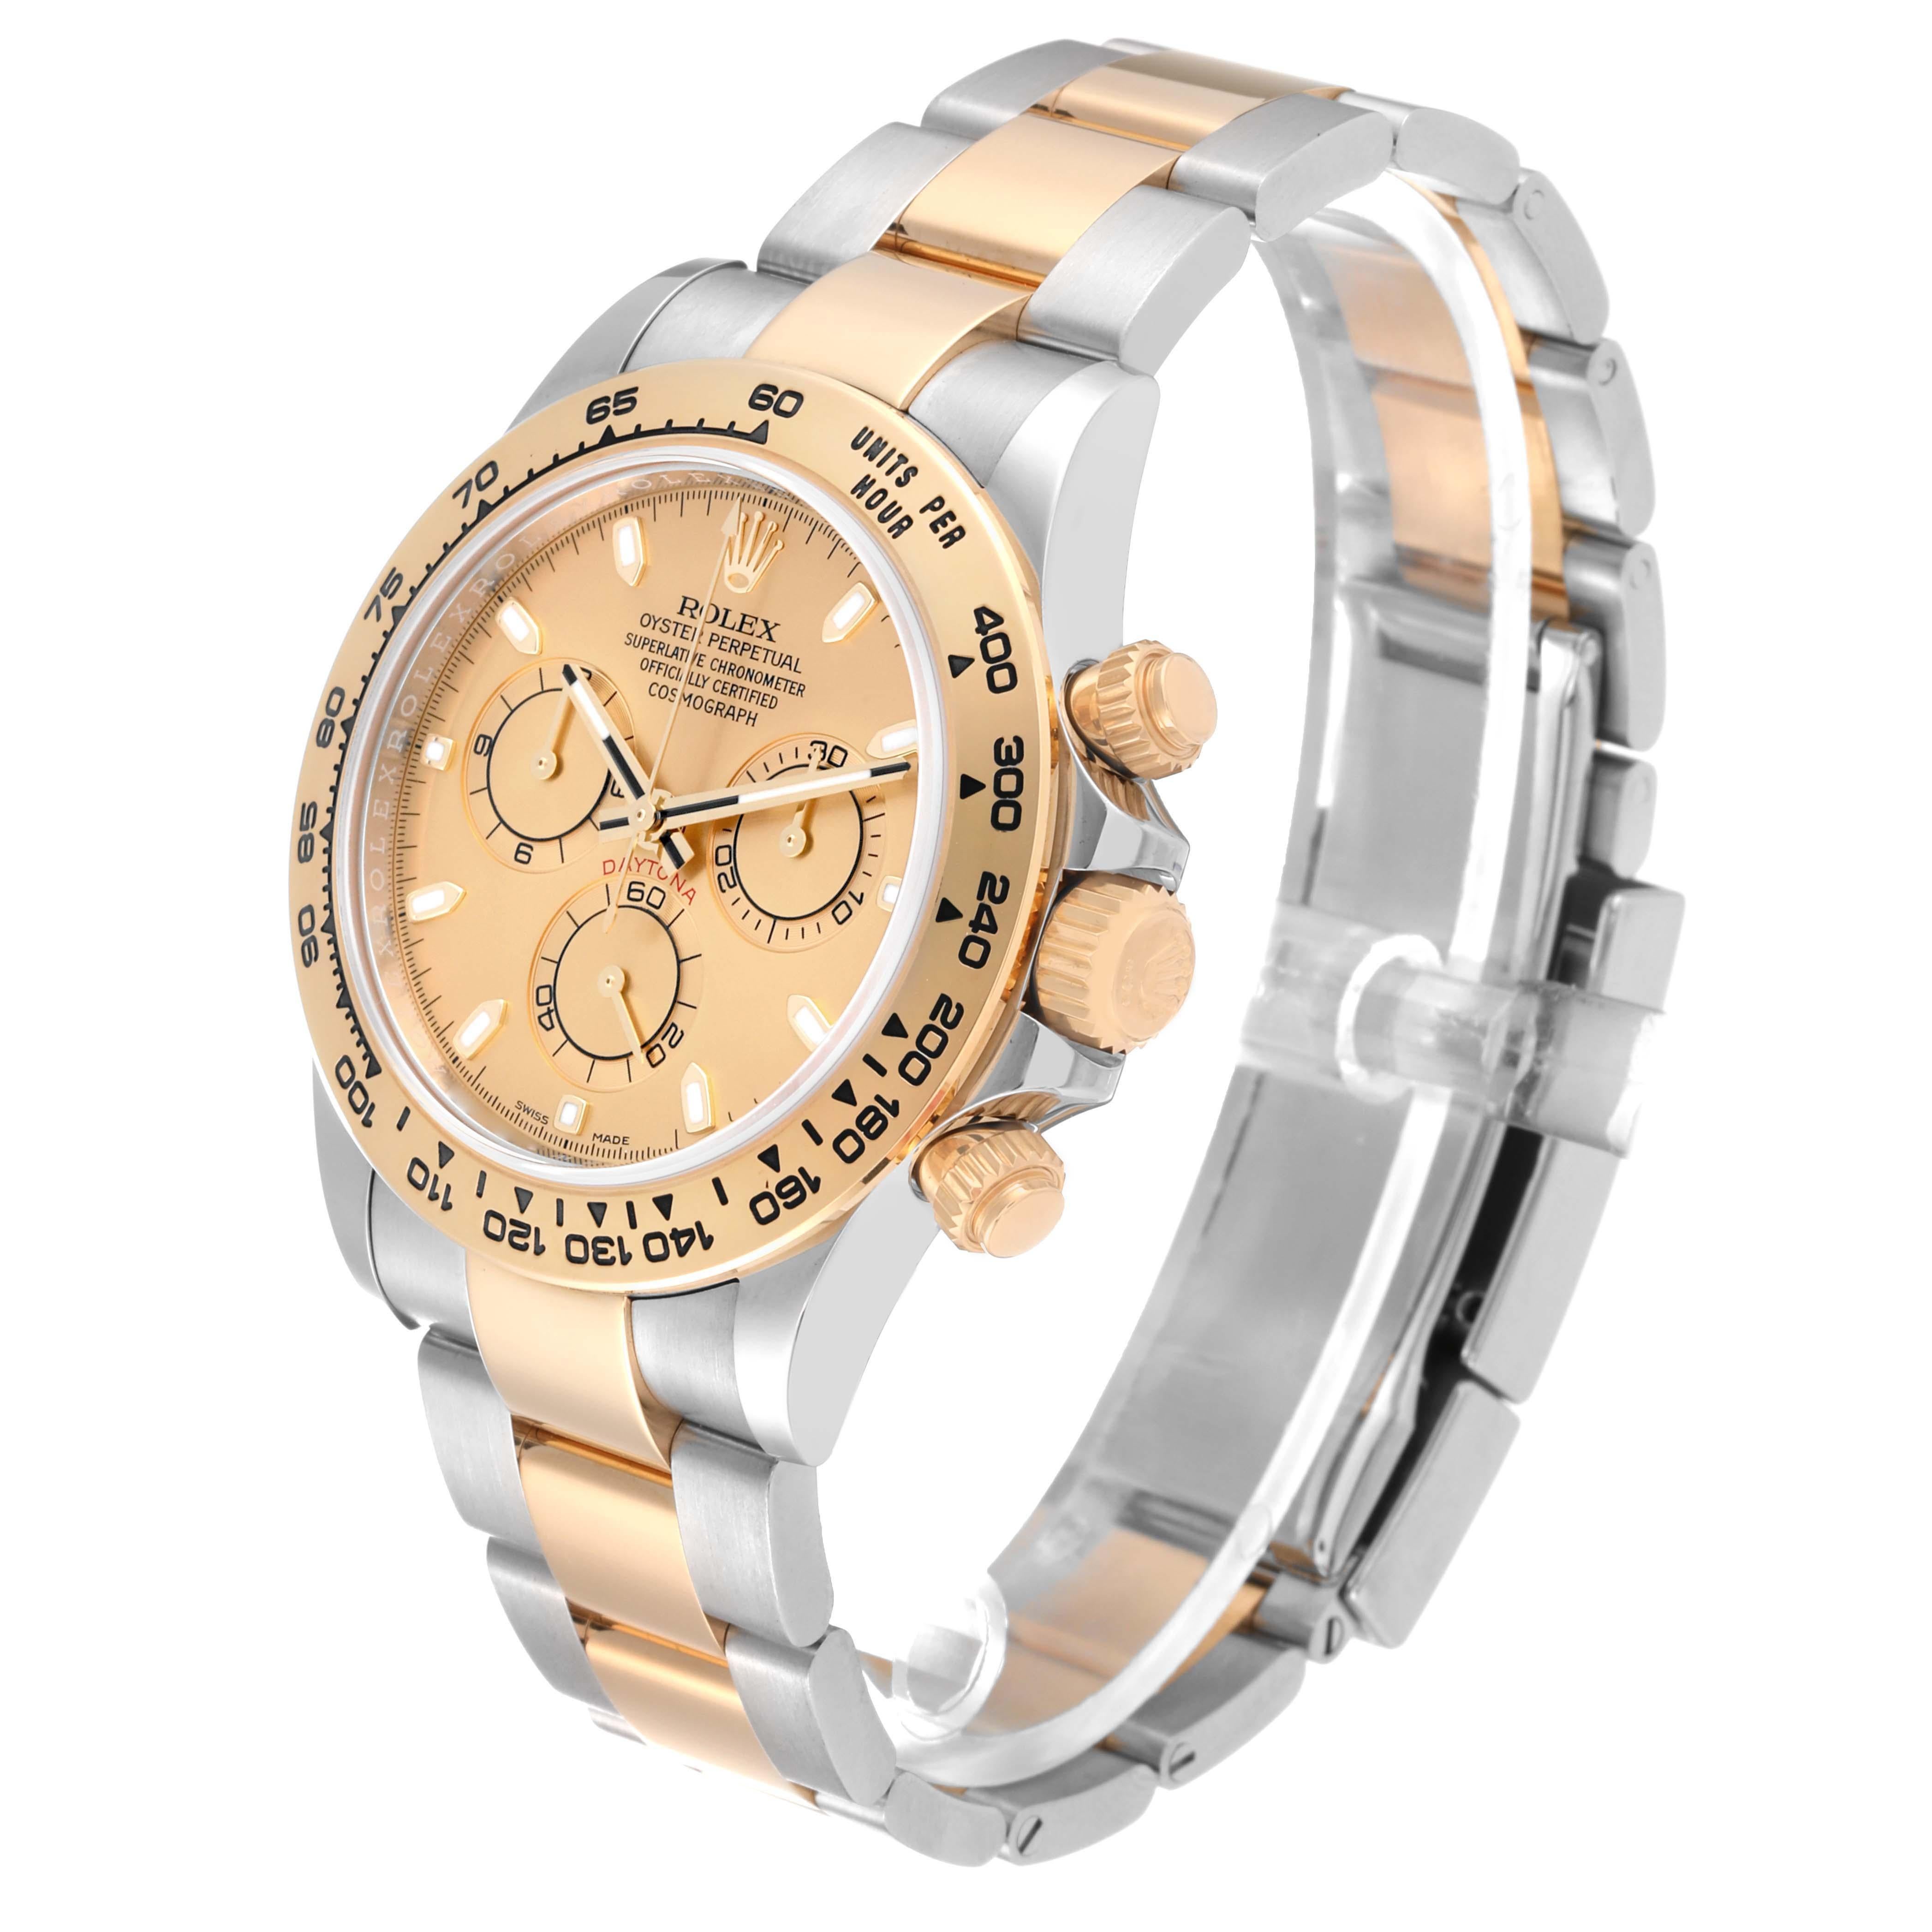 Rolex Cosmograph Daytona Champagne Dial Steel Yellow Gold Mens Watch 116503 For Sale 2